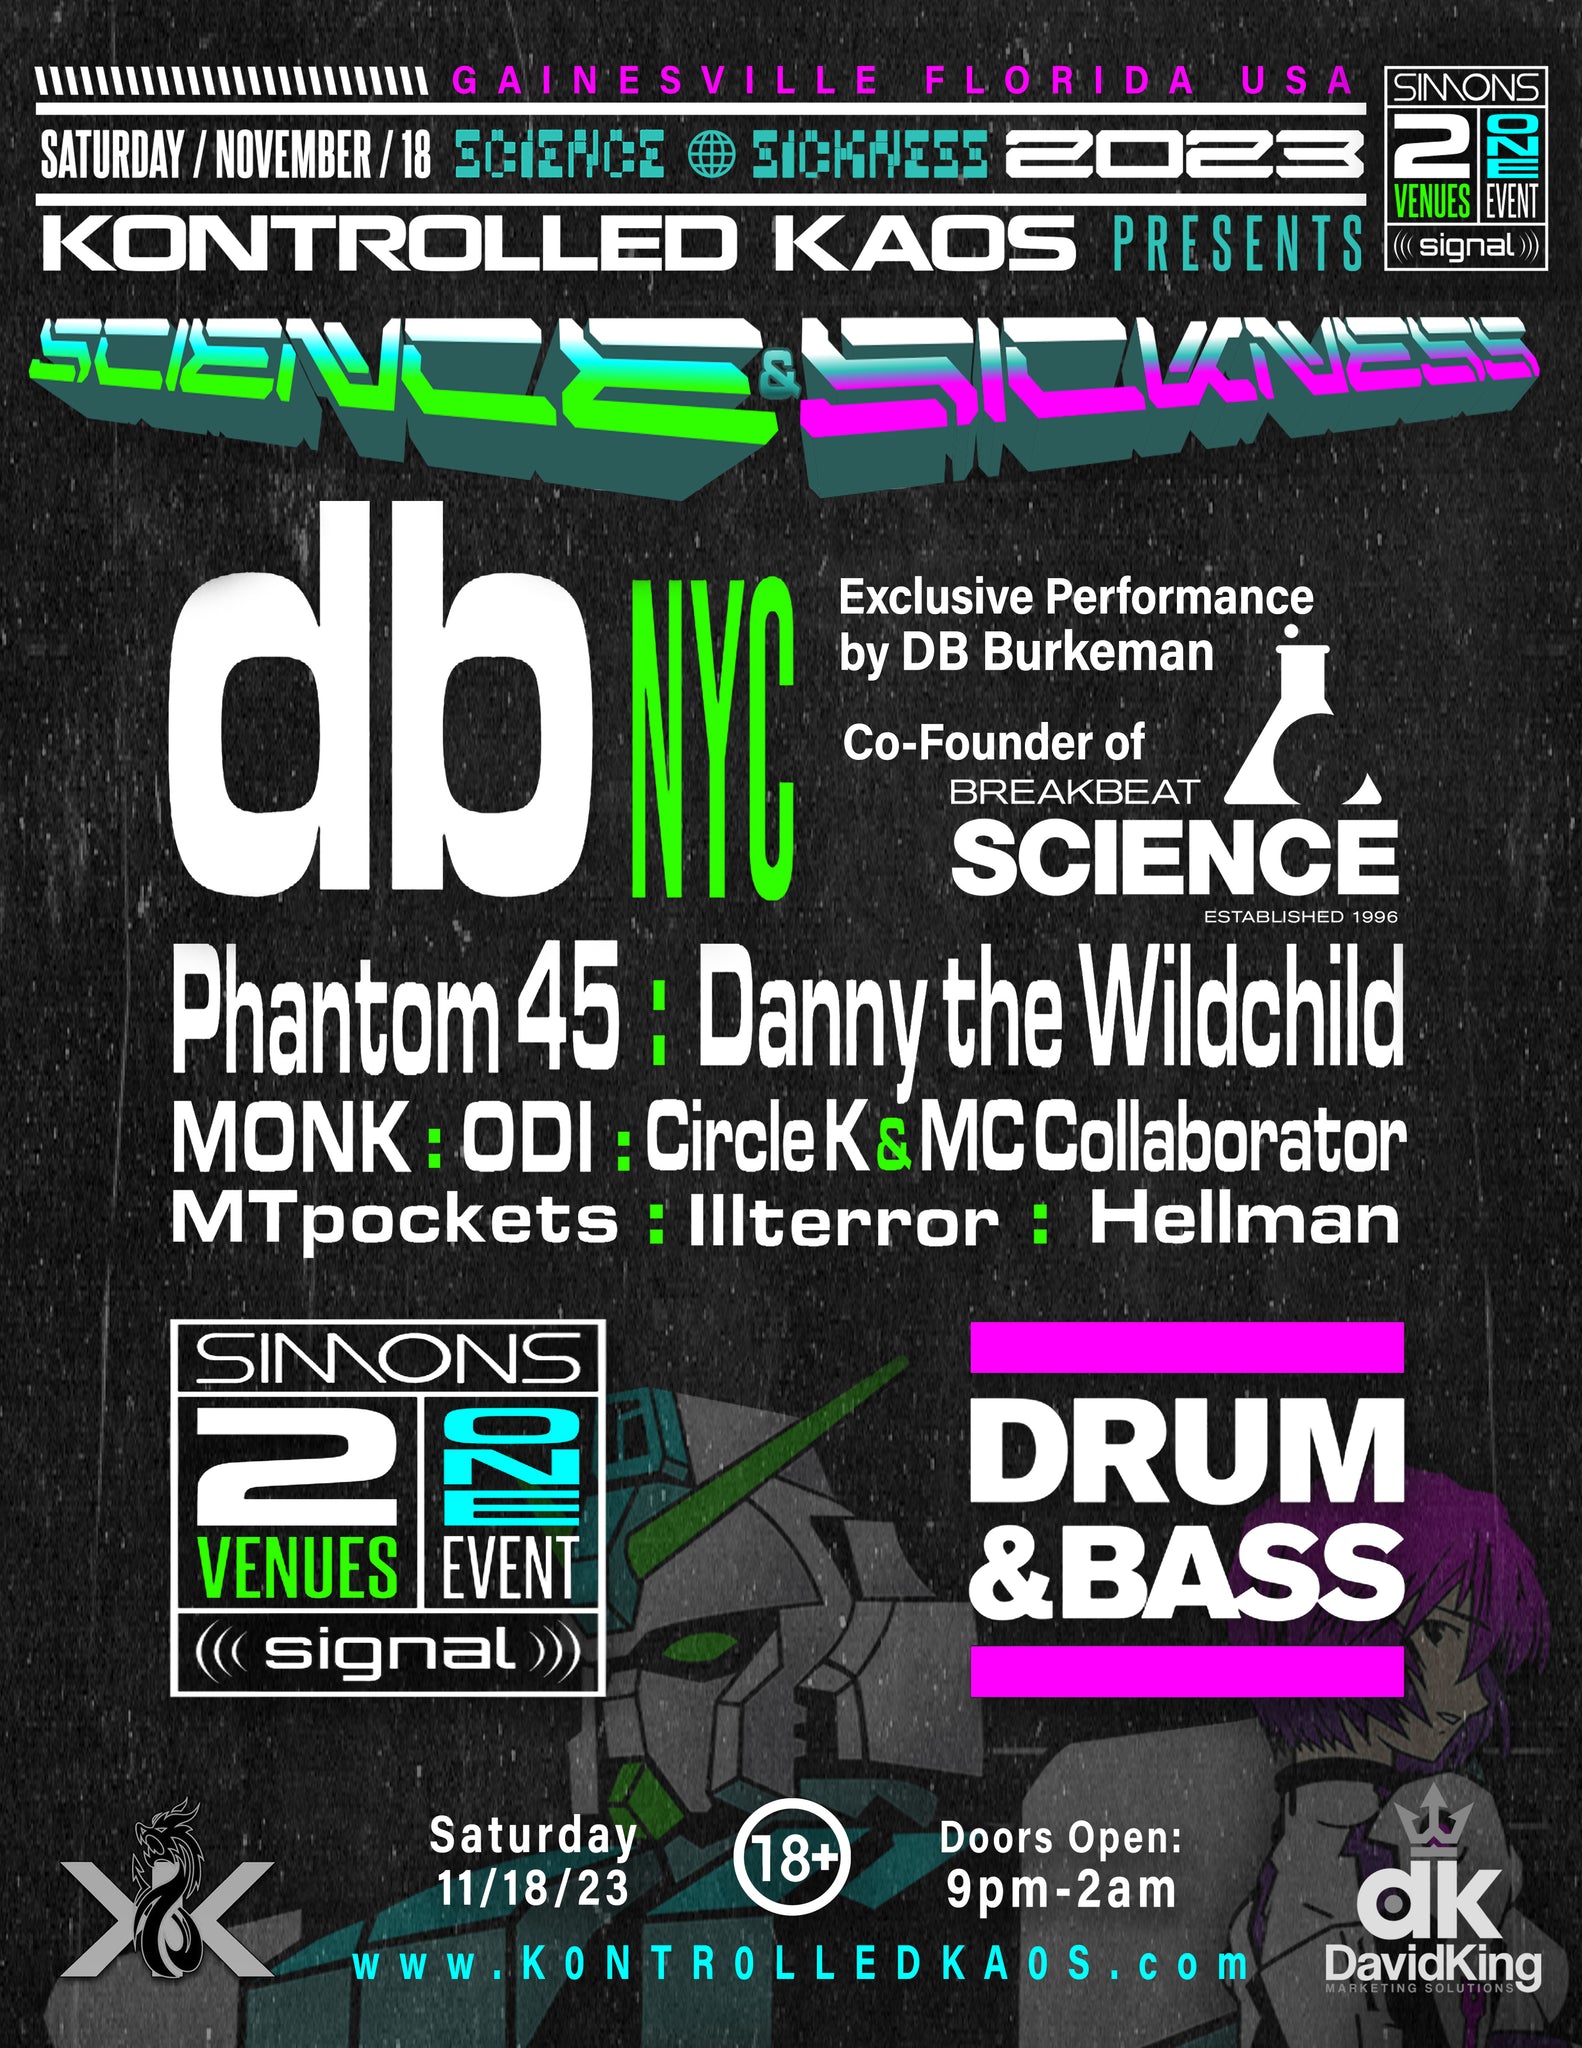 Florida Drum and Bass Music Event on Saturday November 18th 2023